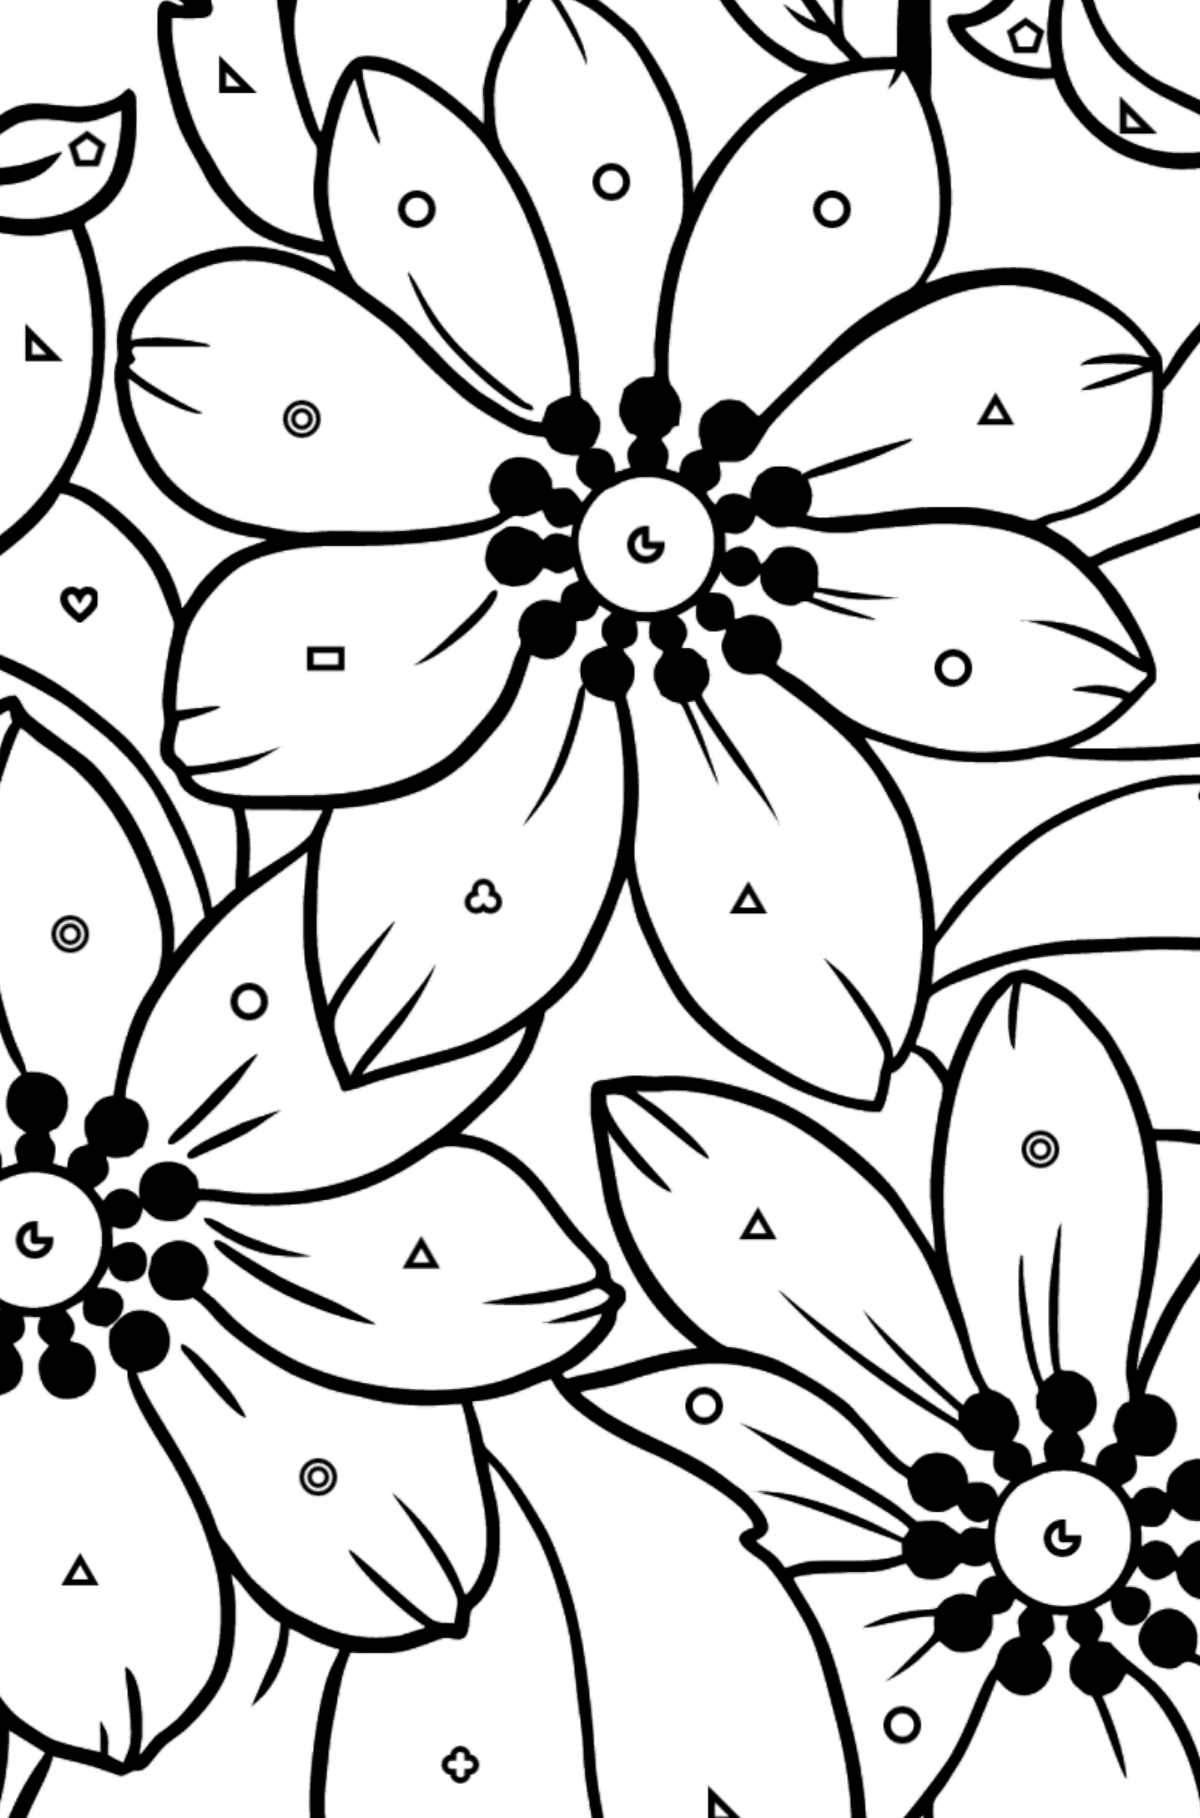 Flower Coloring Page - Anemone - Coloring by Geometric Shapes for Kids